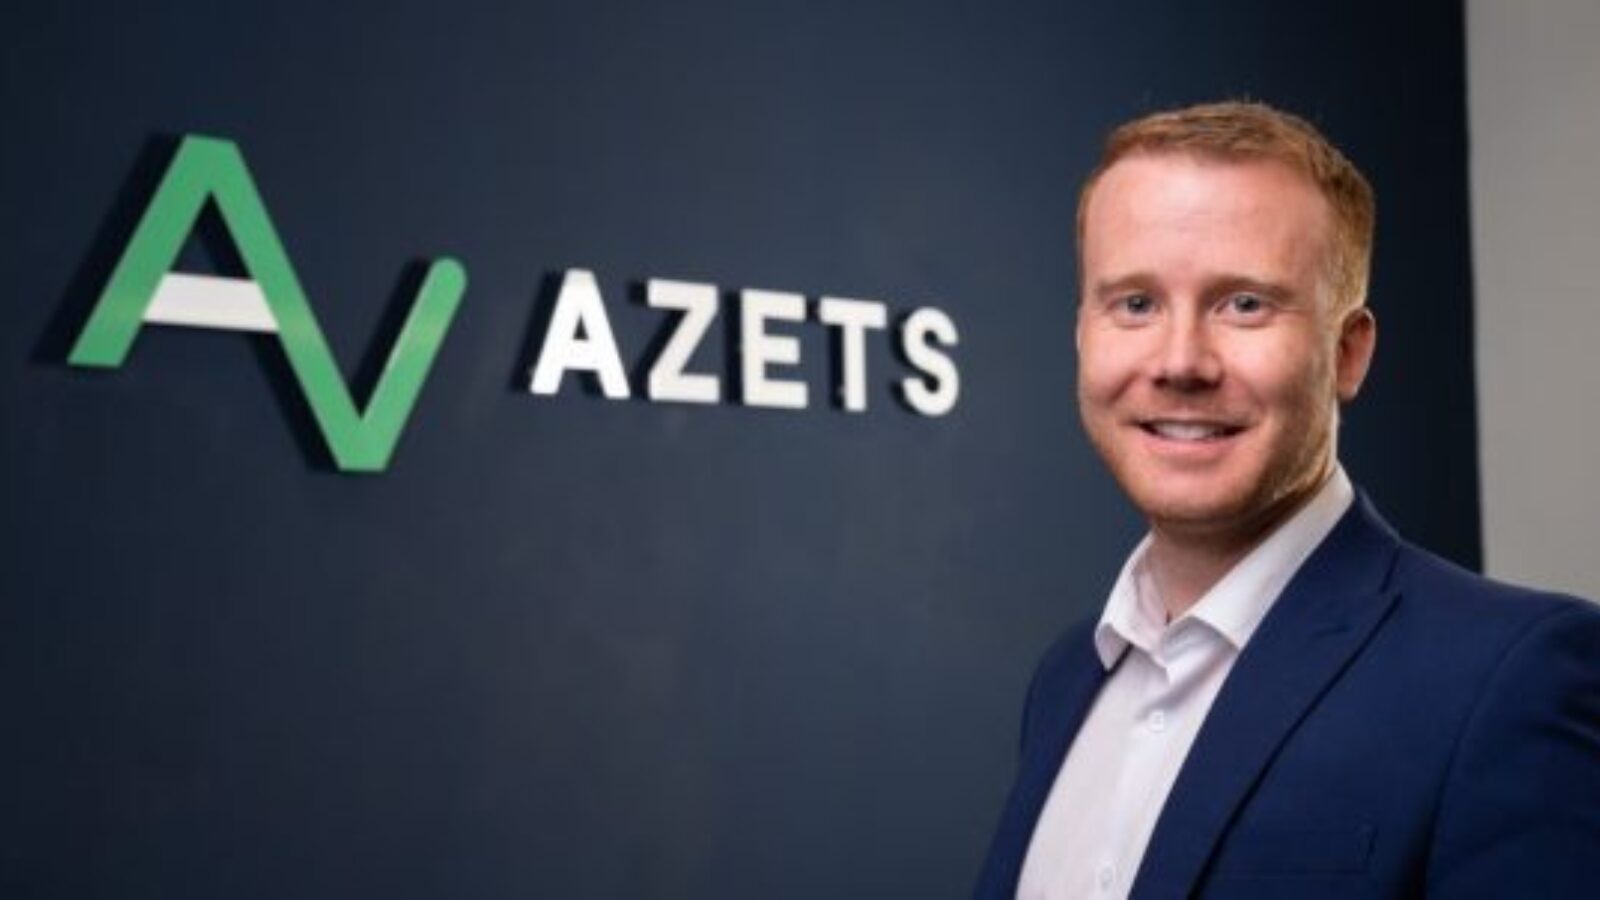 Investing in local talent: Azets' plan for a sustainable future